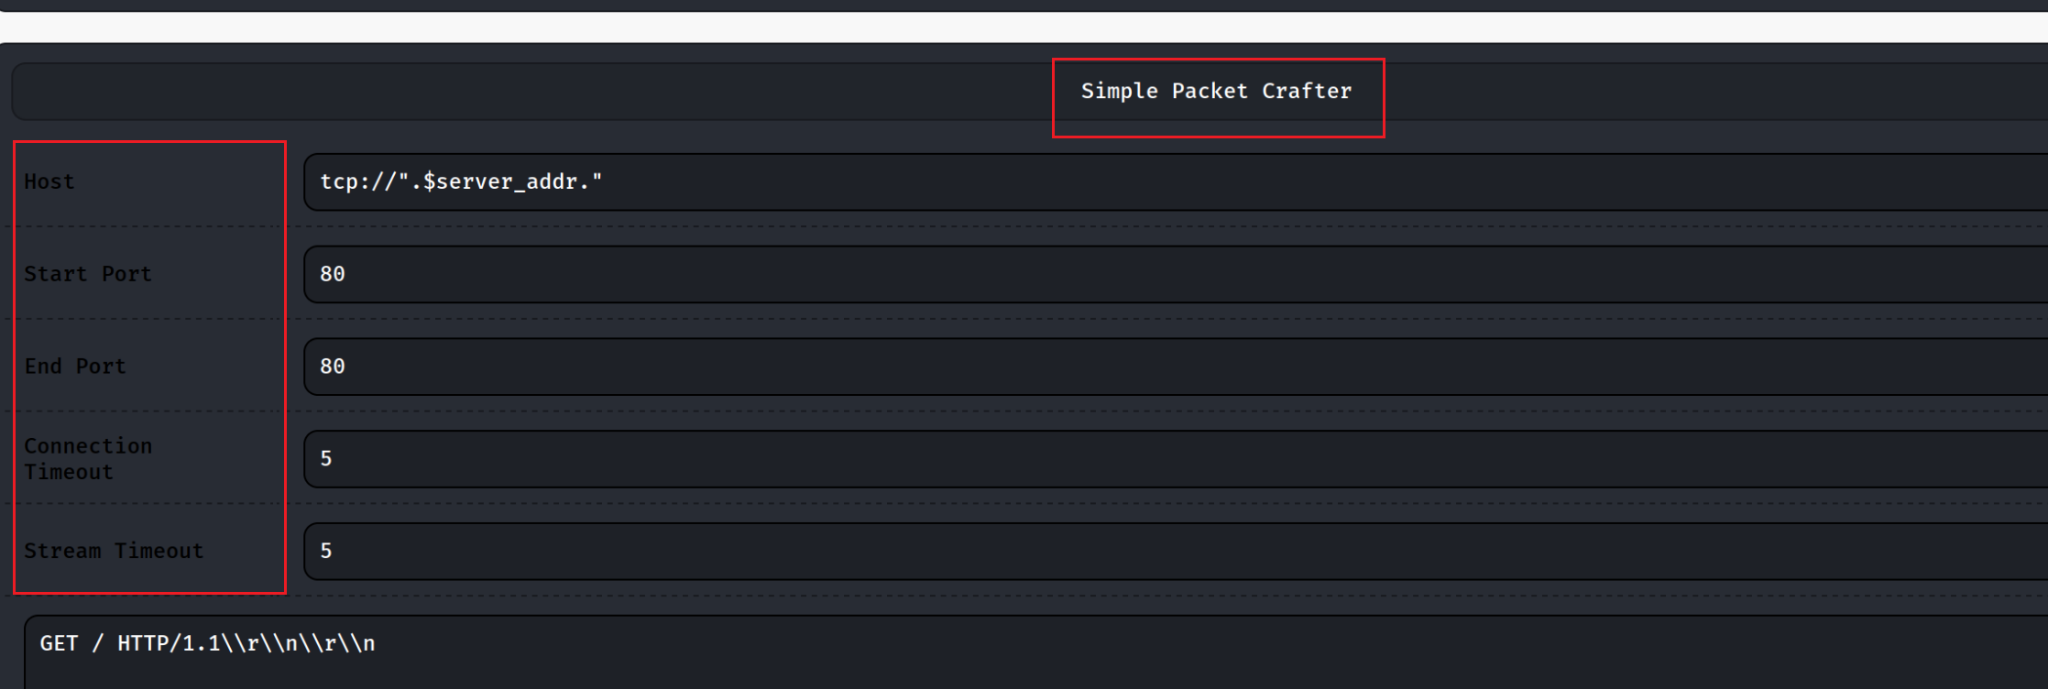 Image 16 is a screenshot of the PHP webshell highlighting the Simple Packet Crafter along with options to the left. 